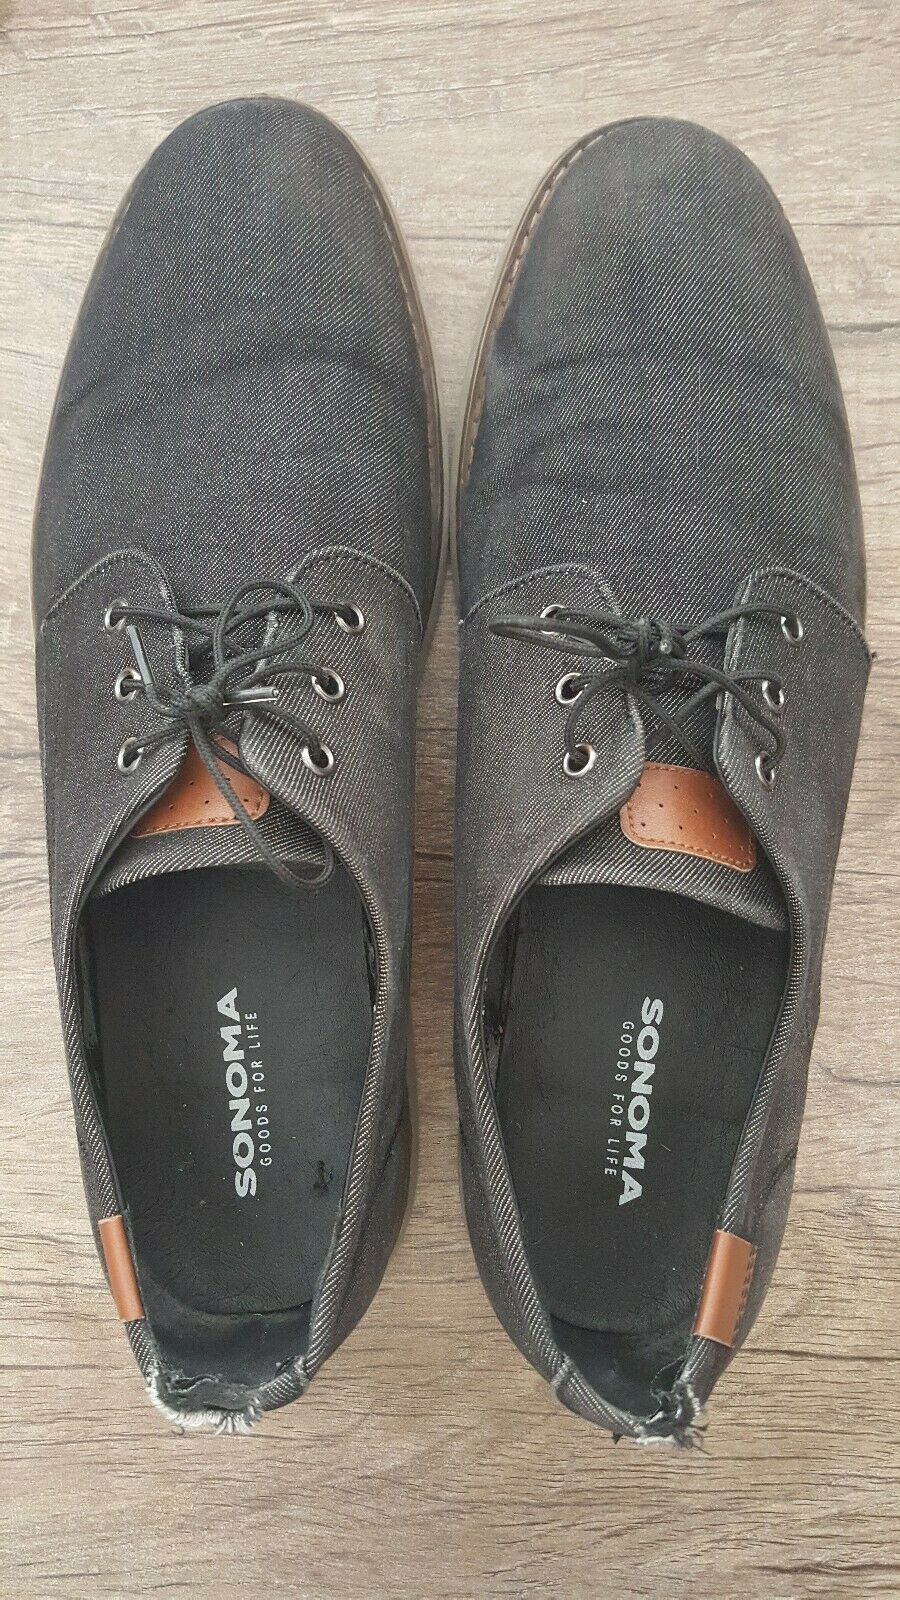 Men's Sonoma Goods for Life Shoes - Size 12- Grey Jean Material